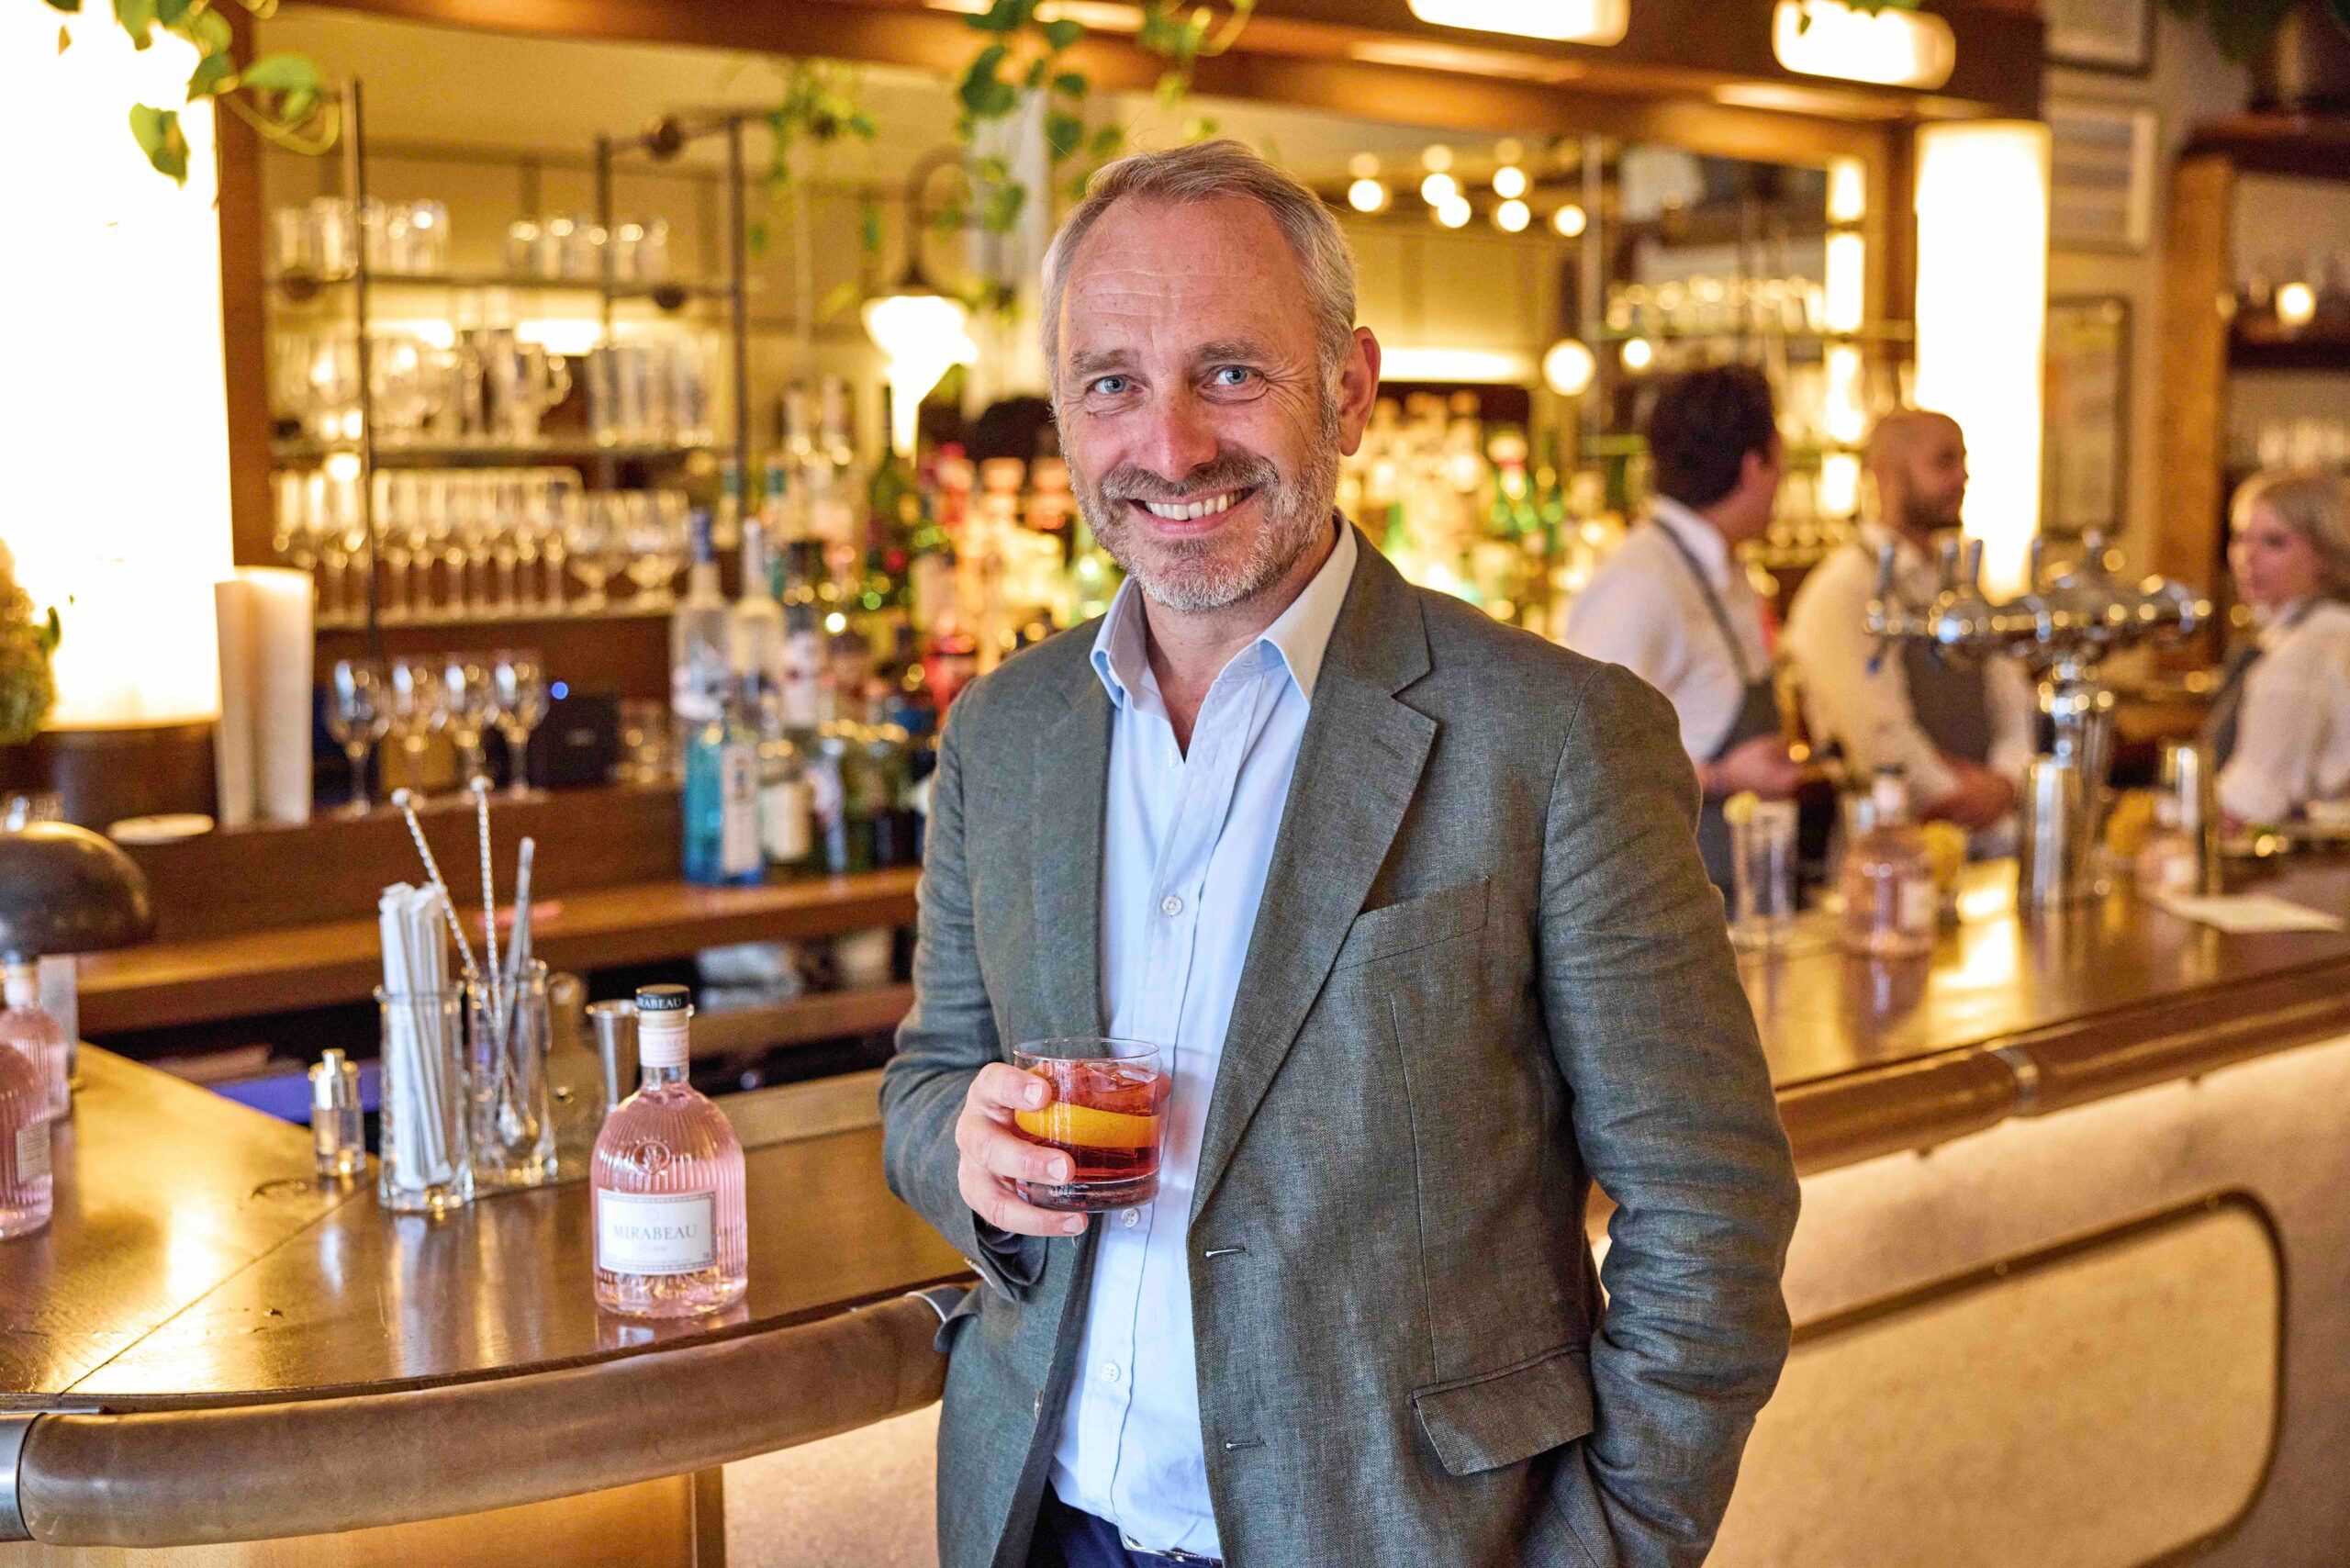 How Mirabeau wants to redefine pink gin category in the on-trade